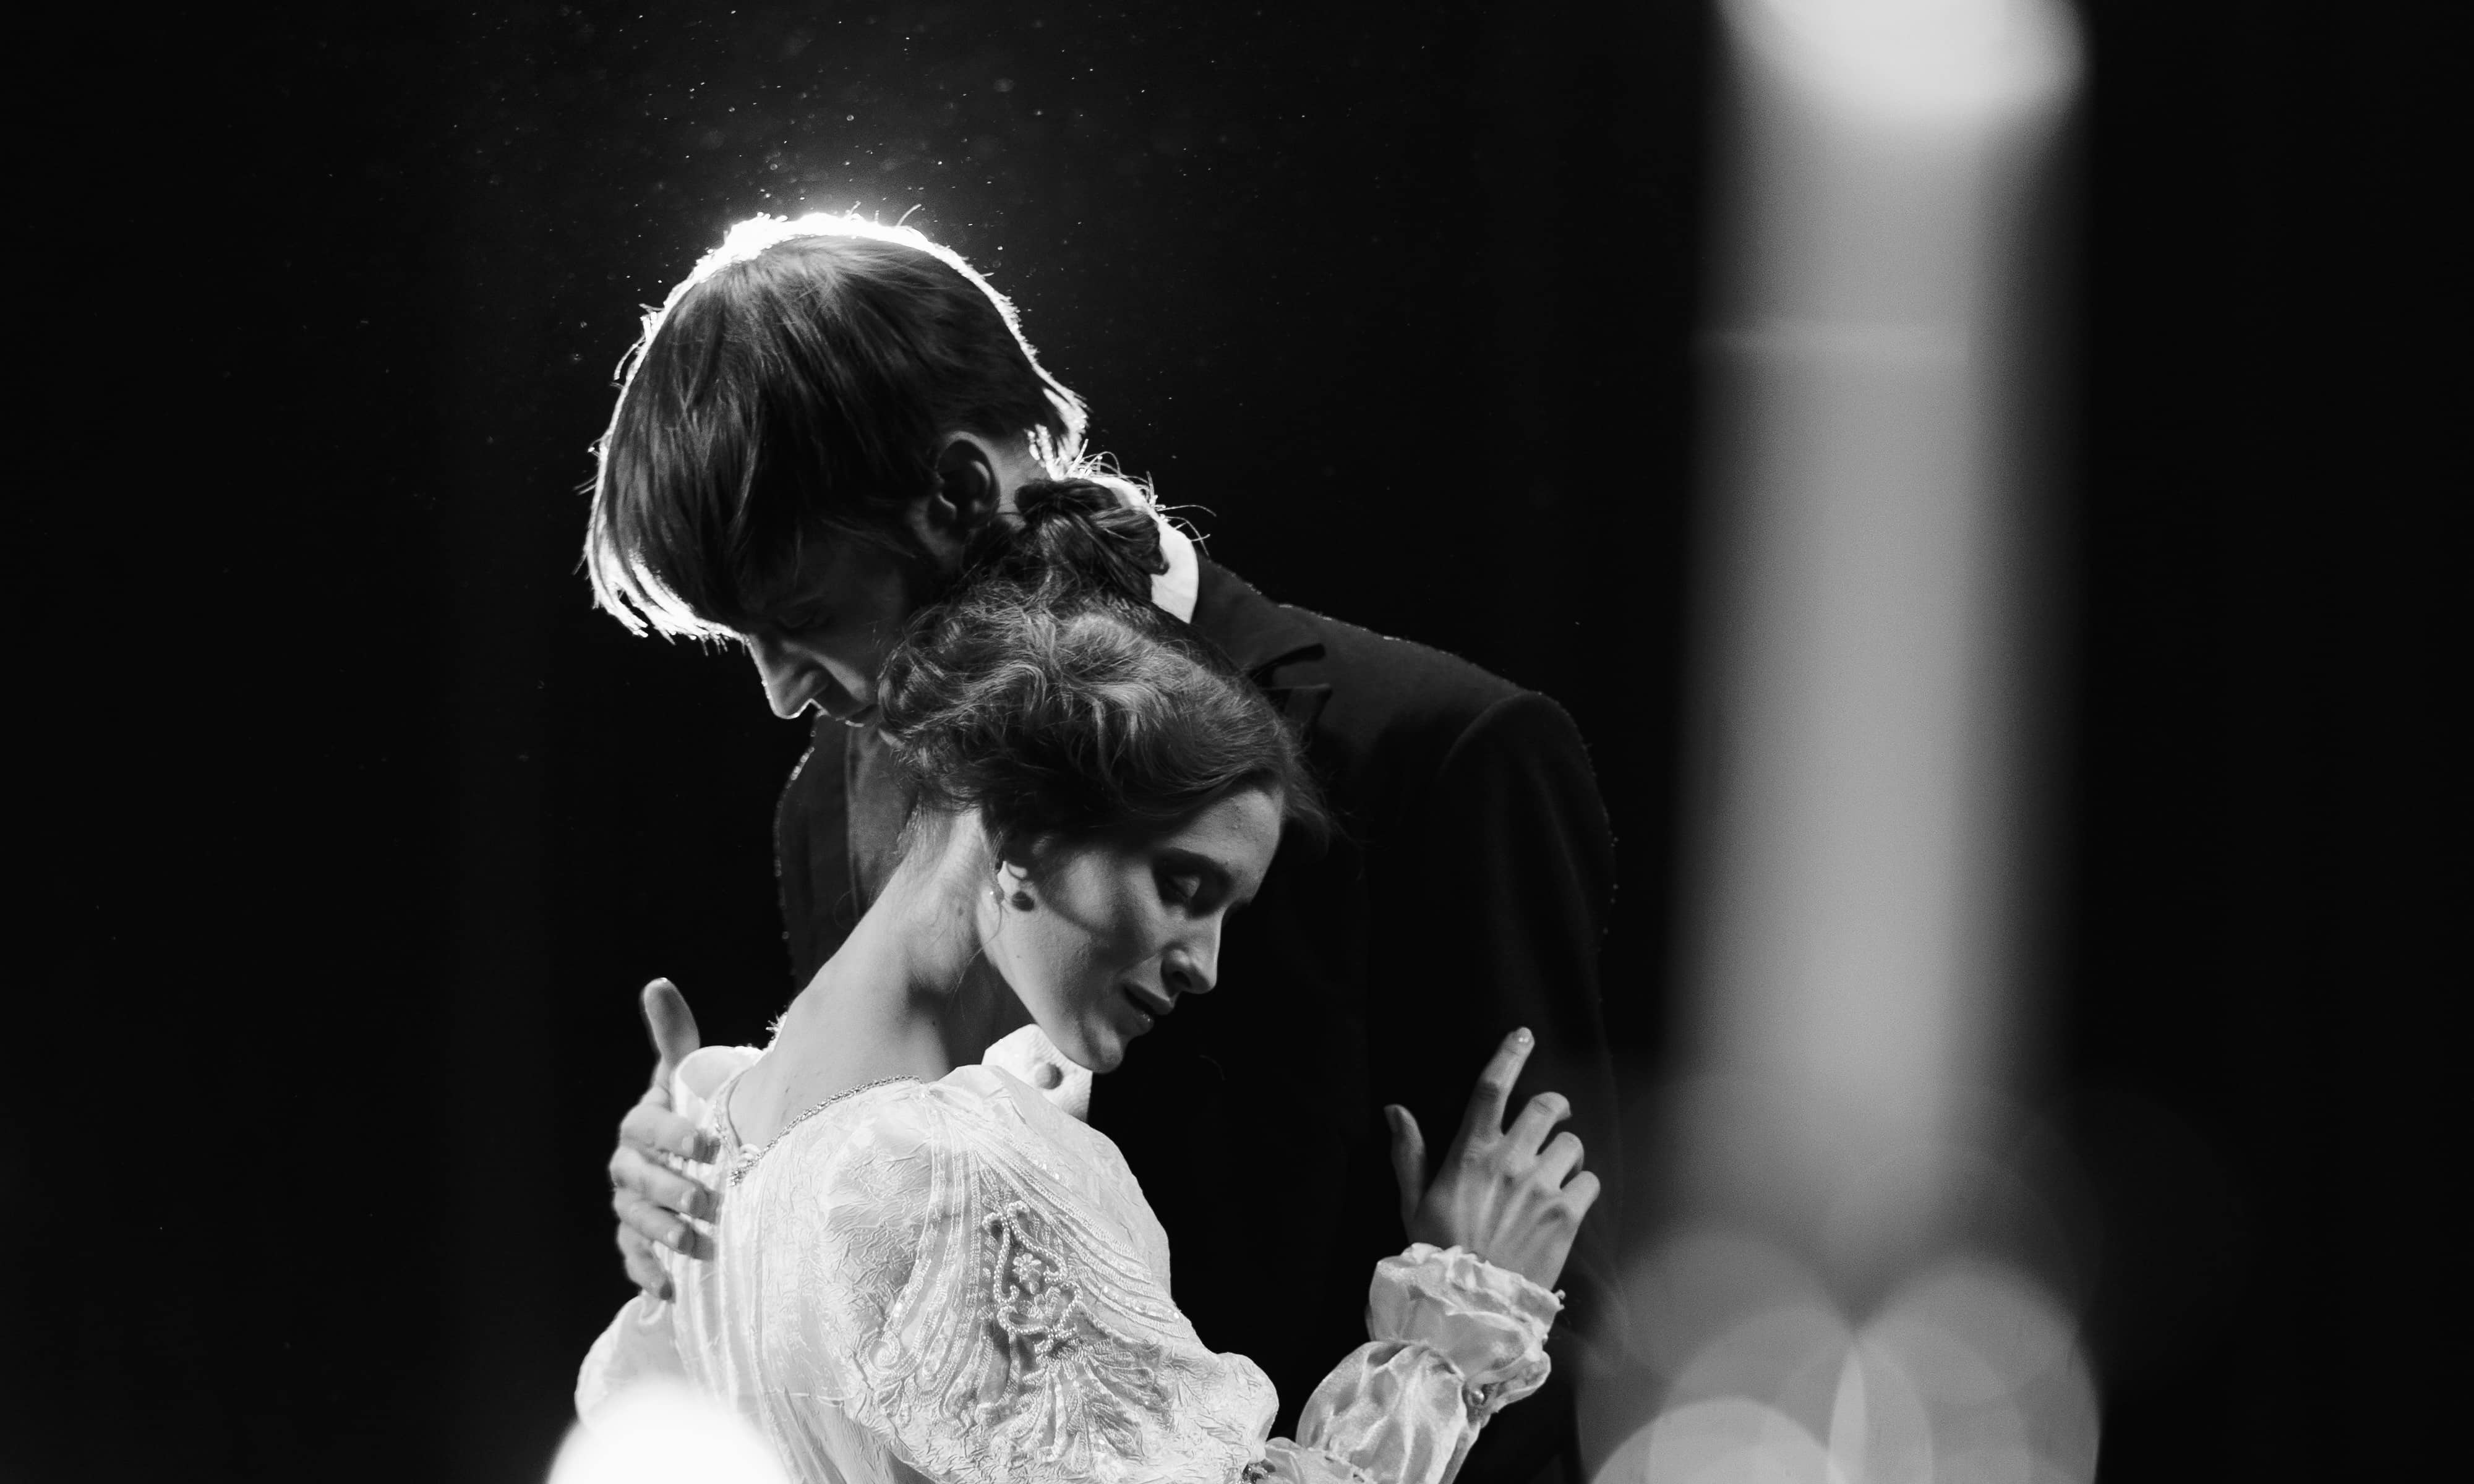 A black and white image of two actors on a stage dancing closly.